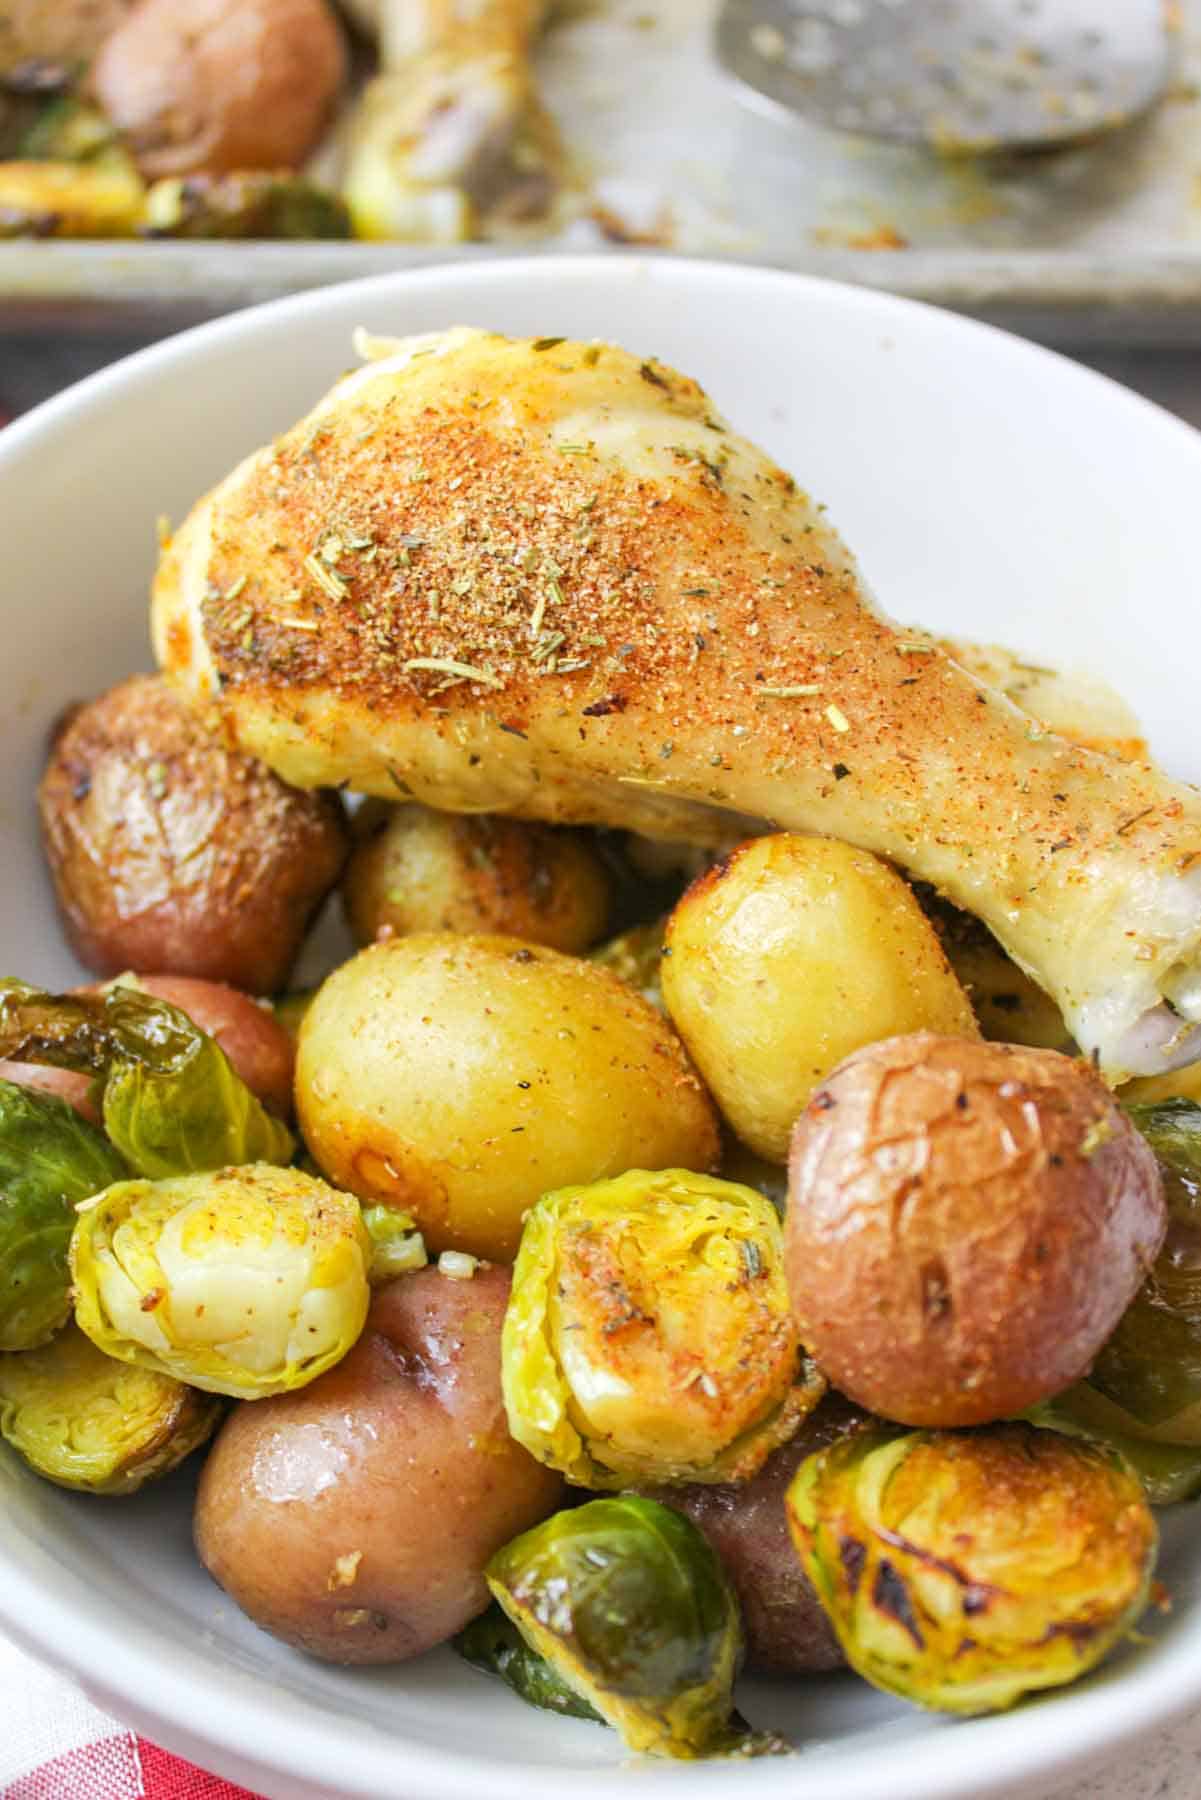 roasted baby potaoes, brussek sprouts and chicken legs in a bowl